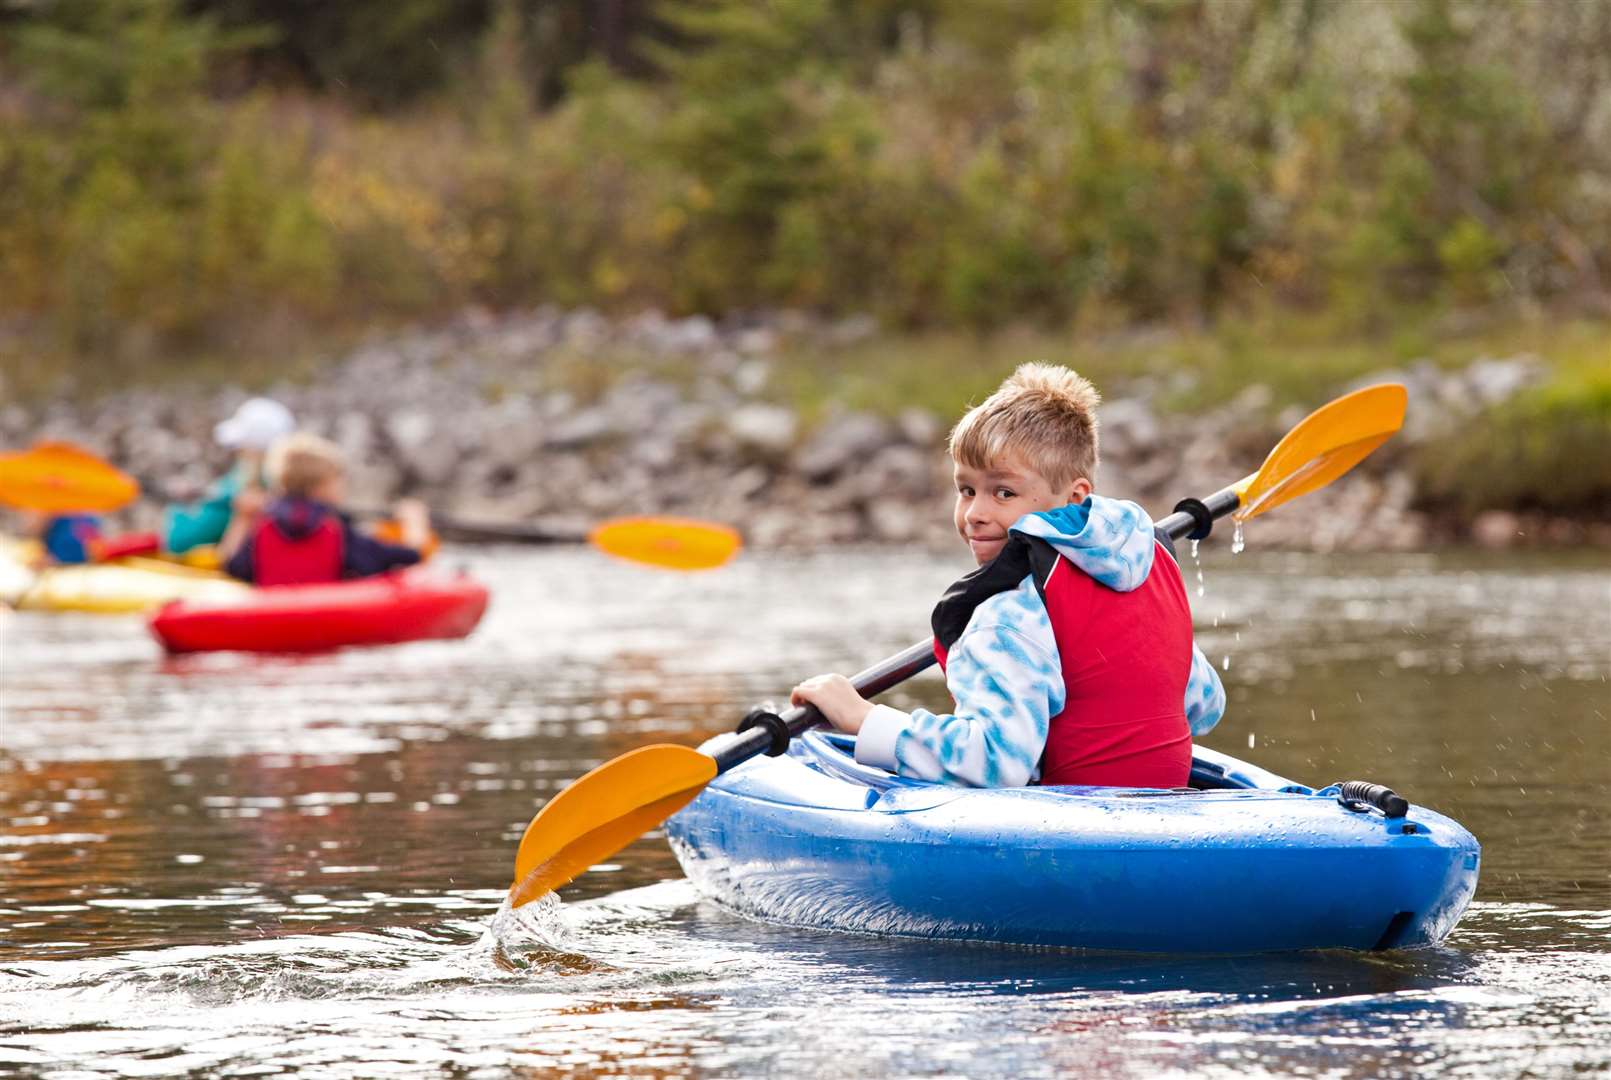 Try kayaking or canoeing to cool down